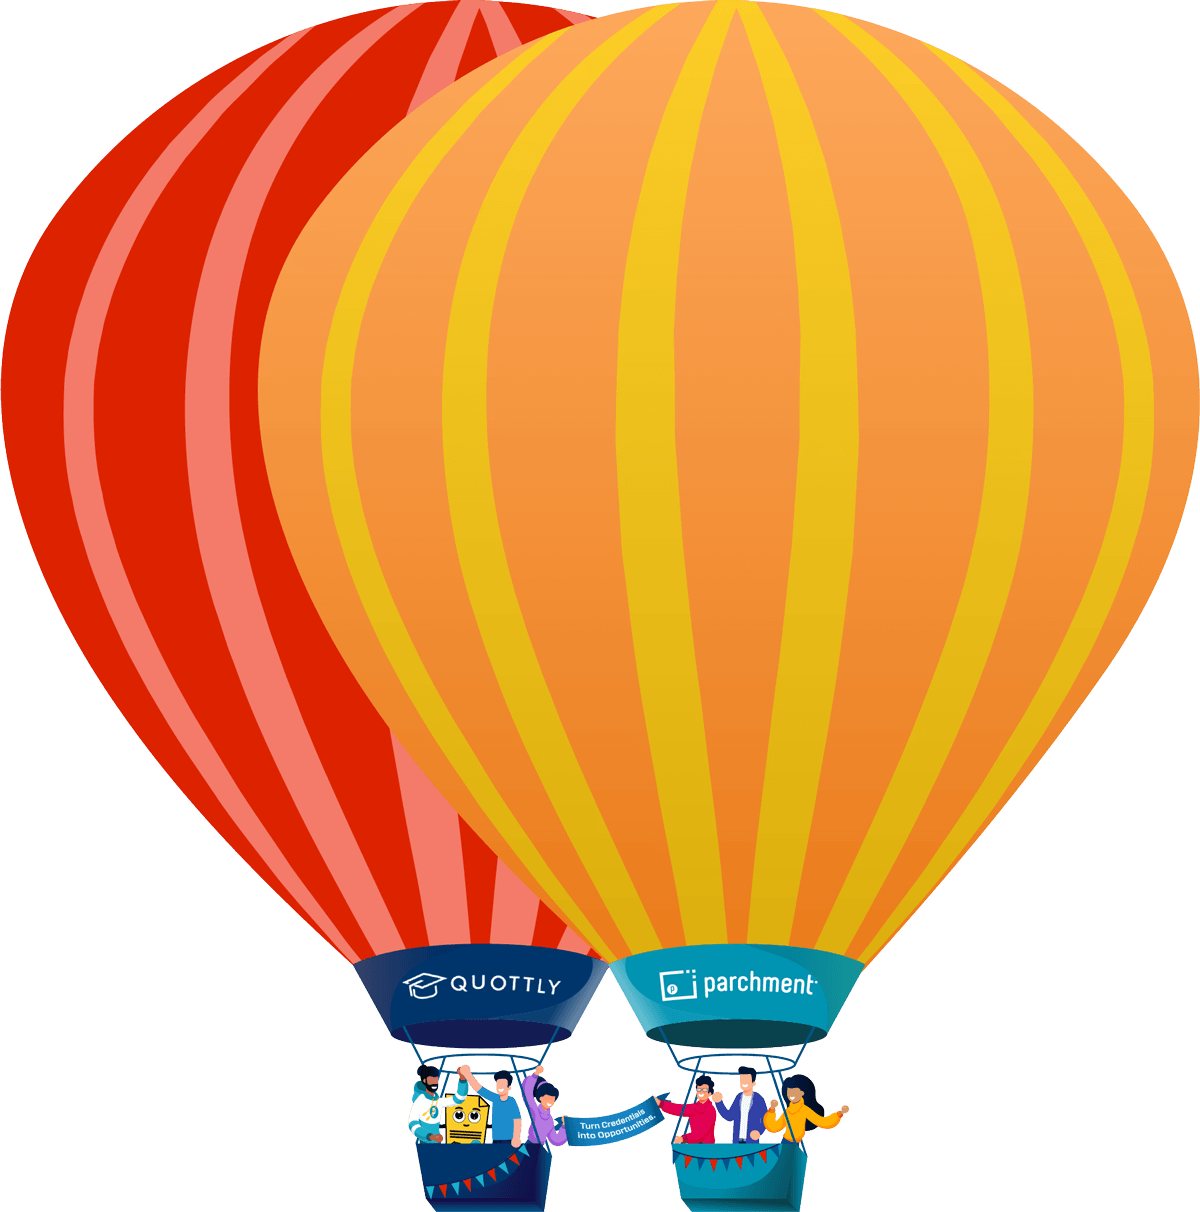 parchment and quottly hot air balloon illustration